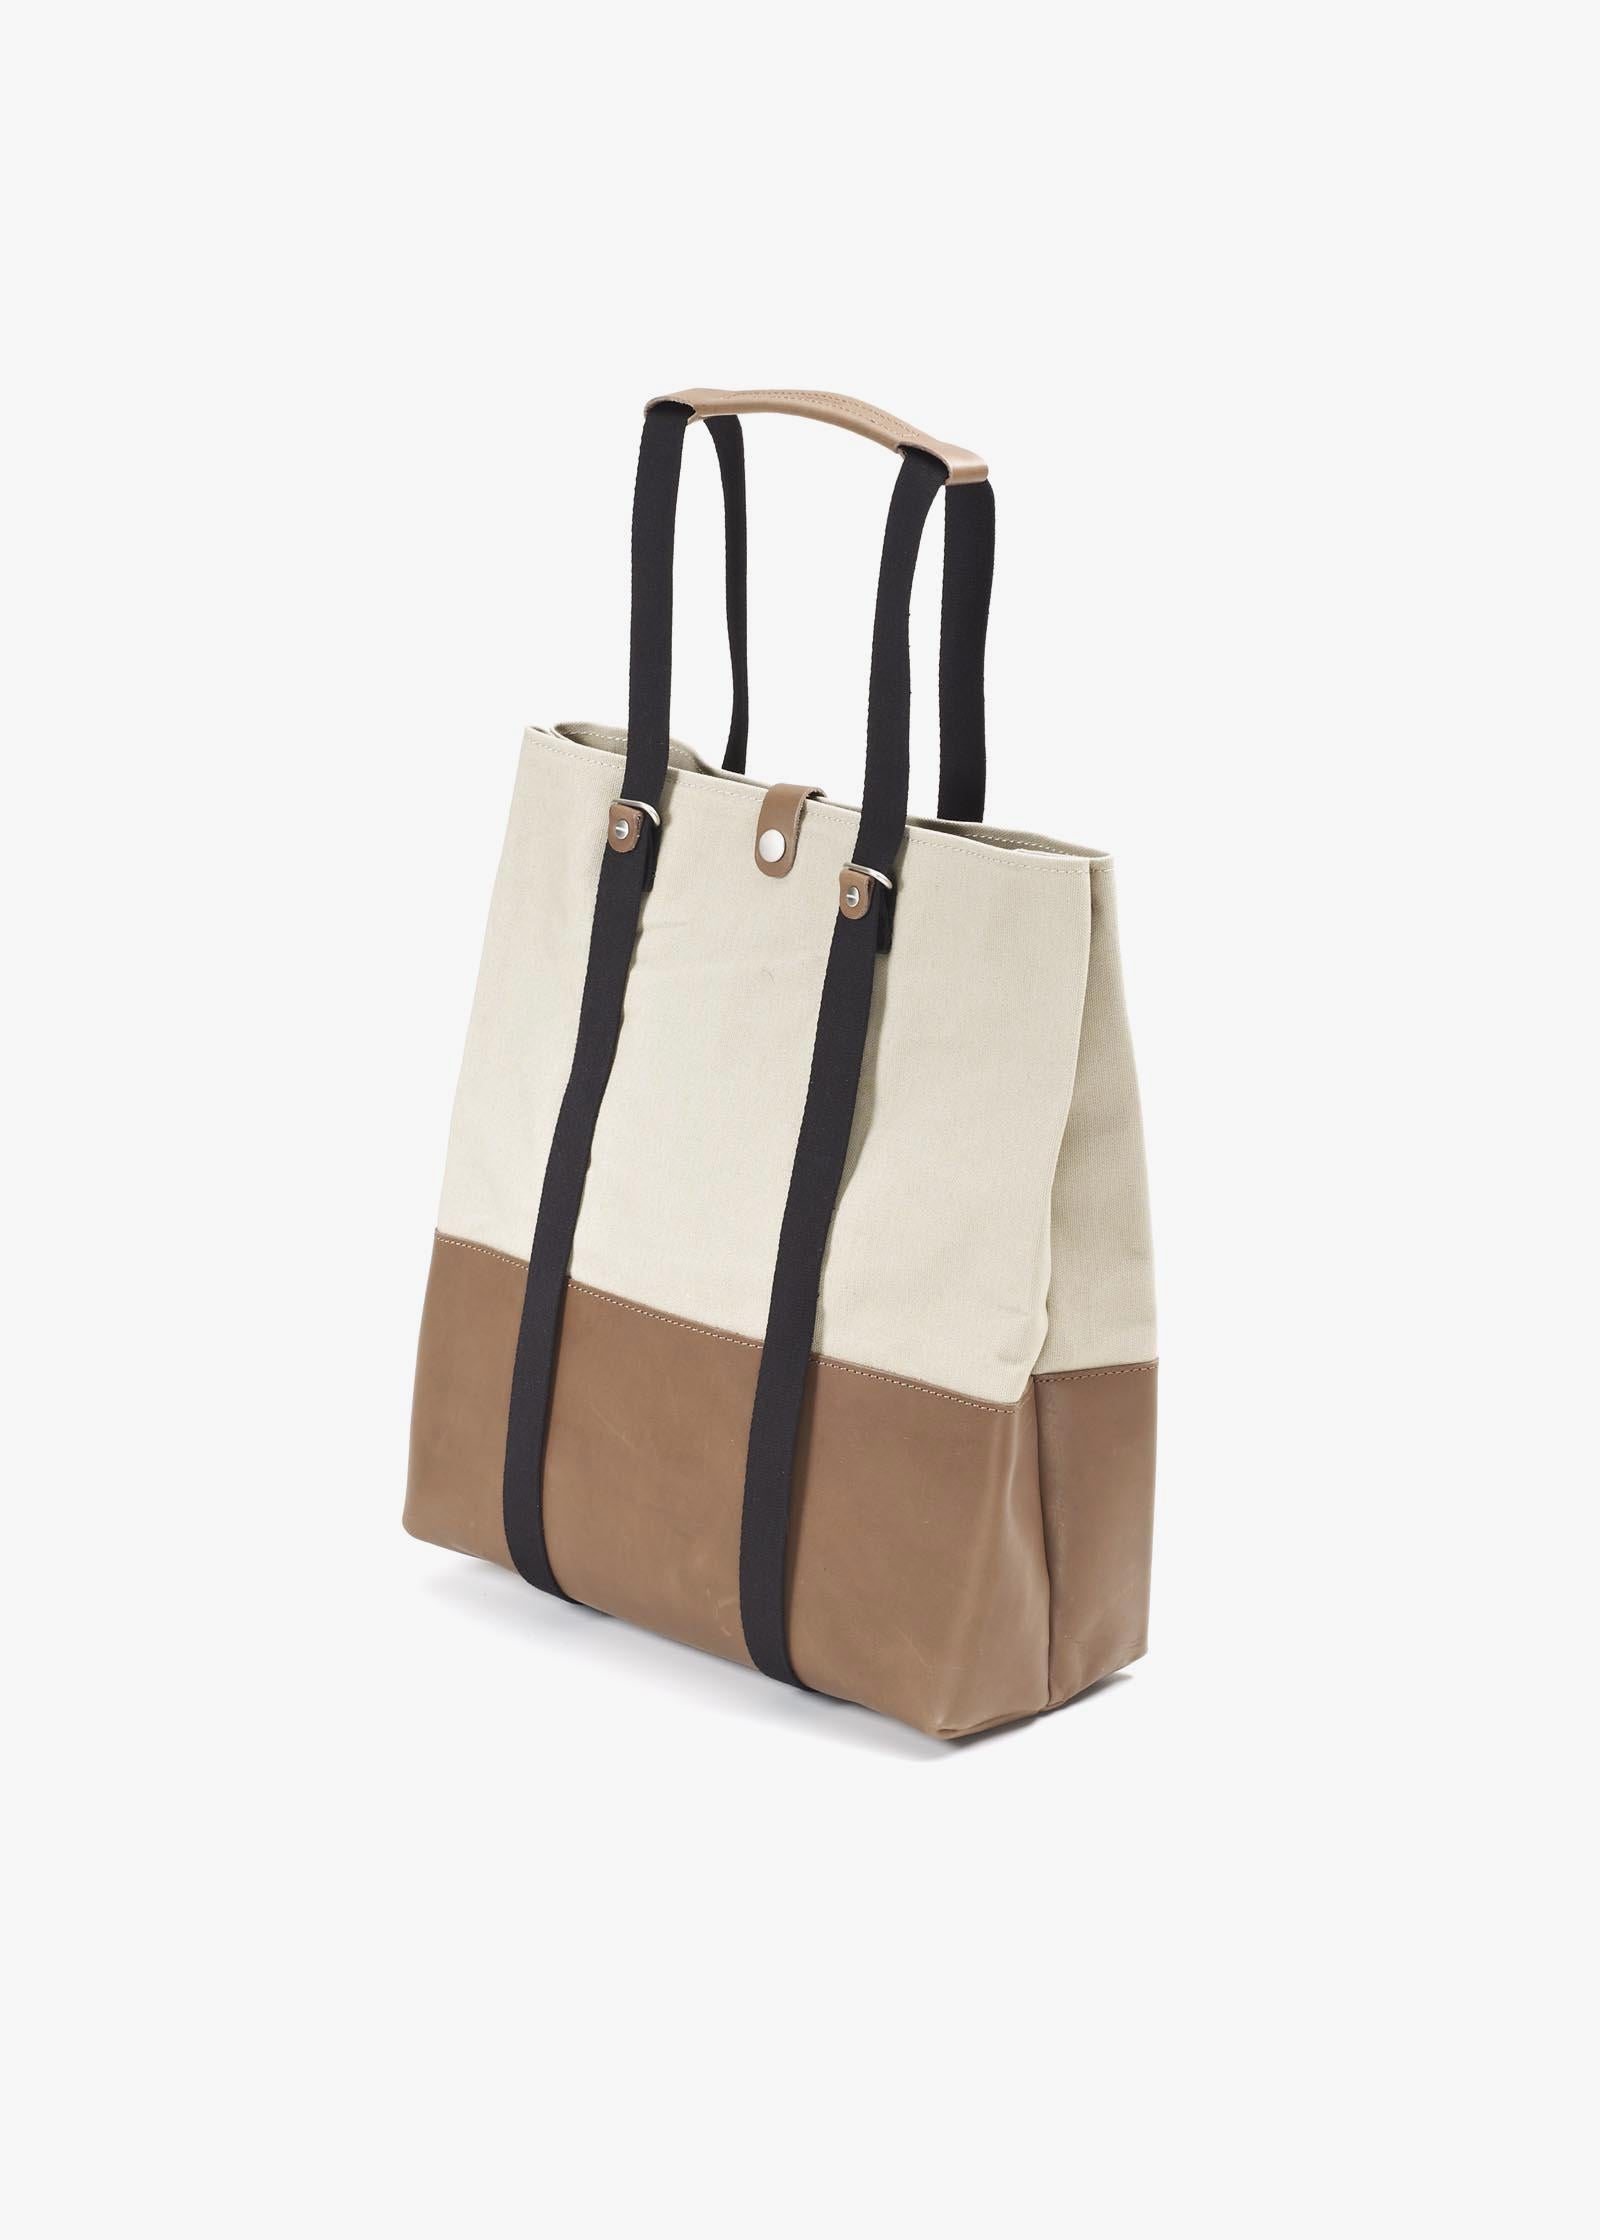 Shopper – Brown Leather Canvas